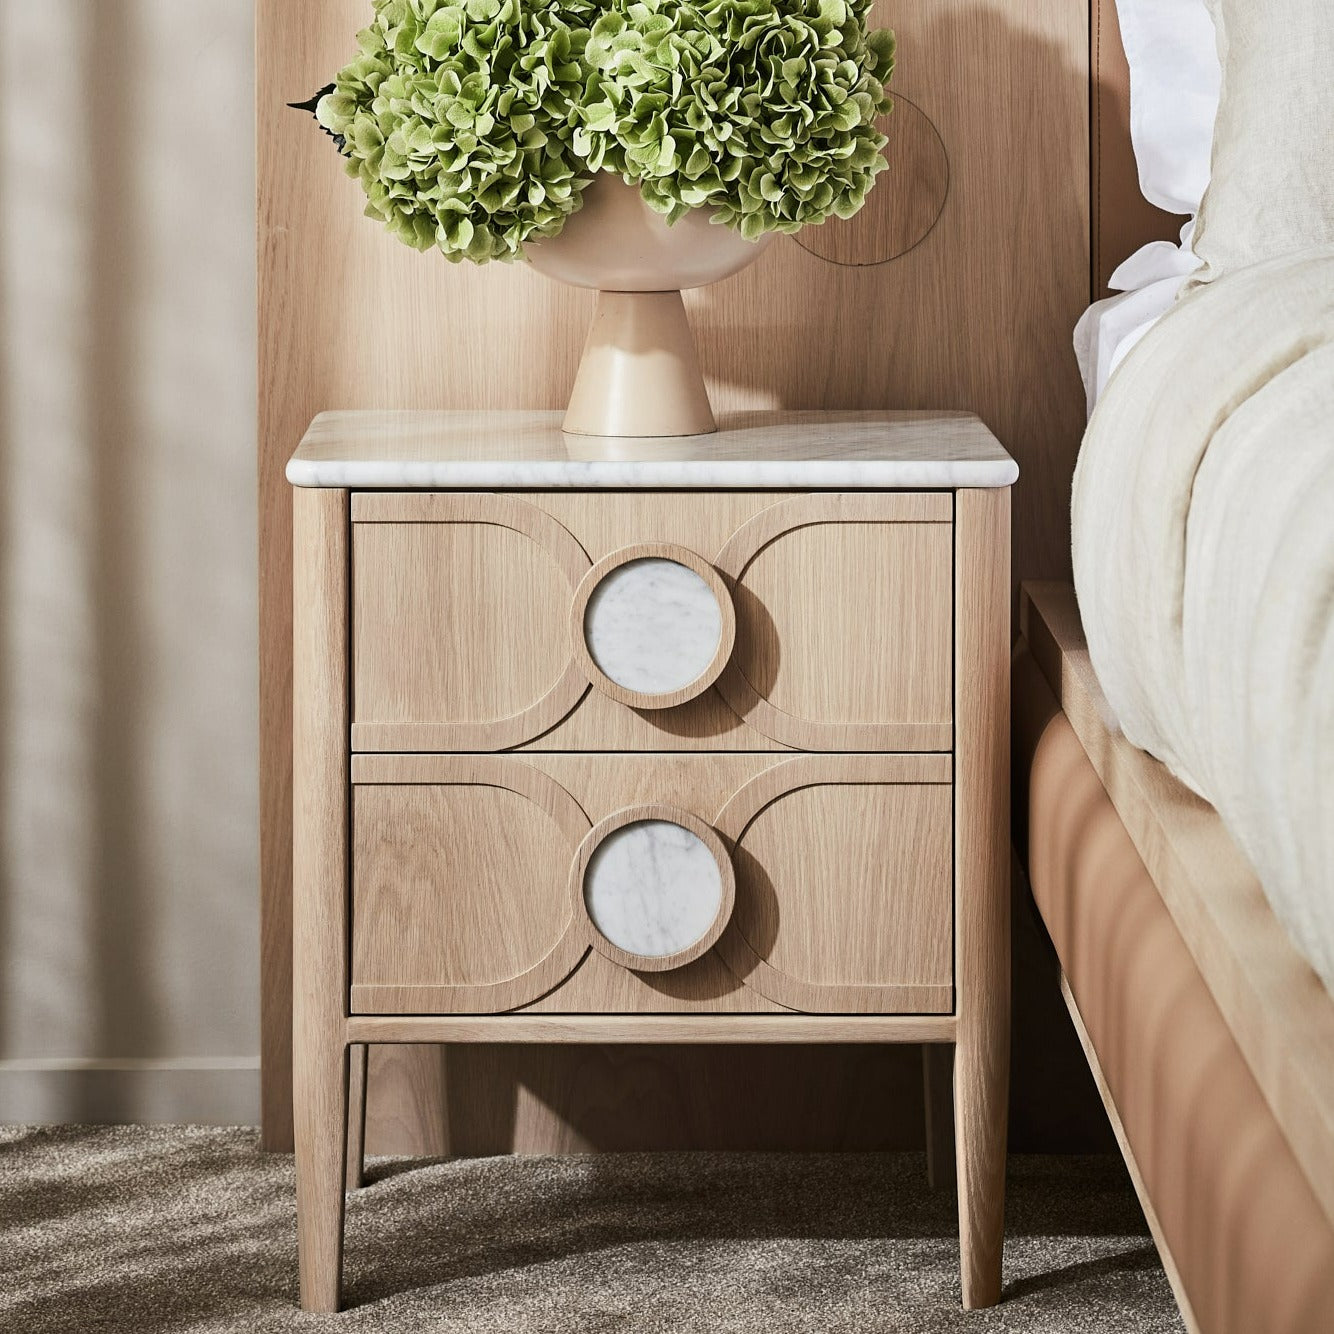 Victoria 2 Drawer Marble Bedside Table - Zuster Furniture